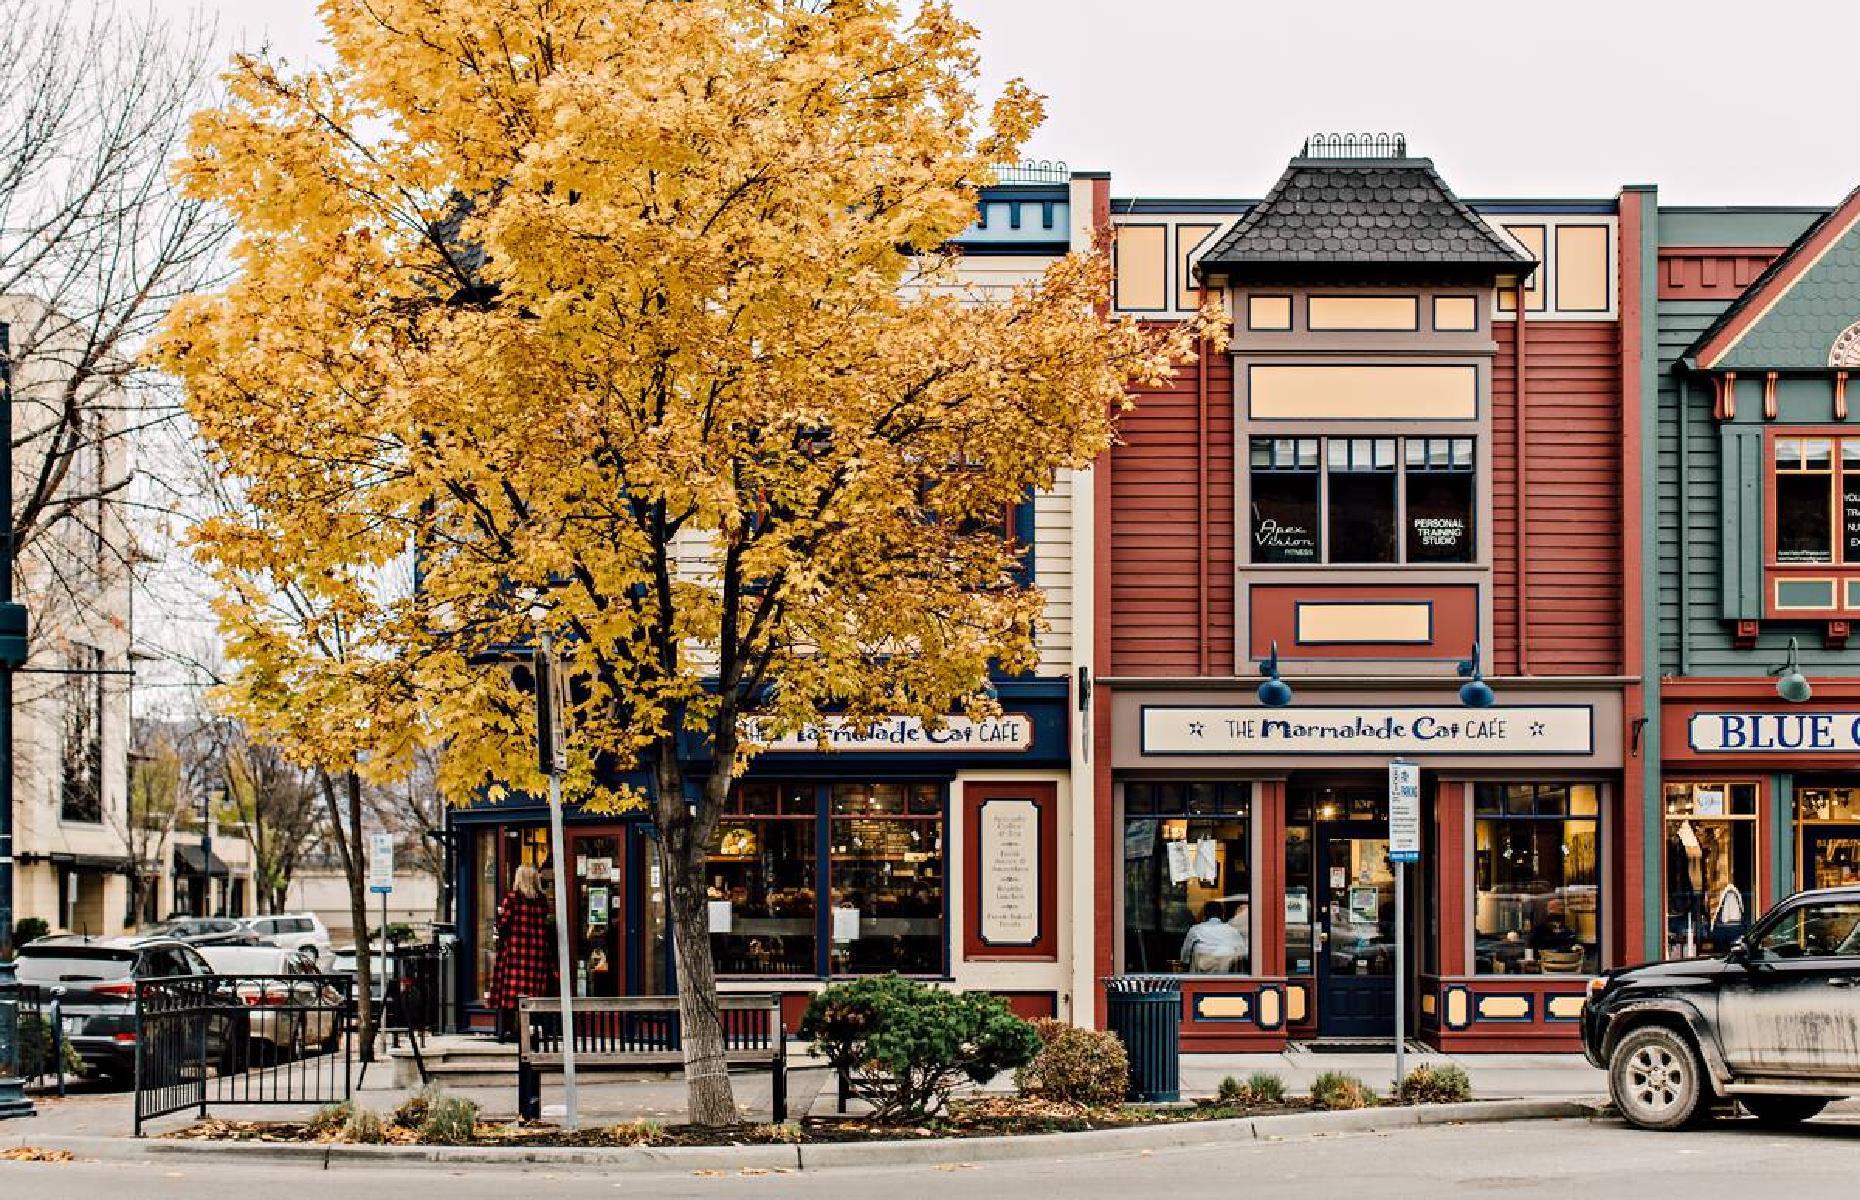 Canada is full of great cities, and each of those is home to neighborhoods with their own distinctive characters. Some, however, are cooler than others. These 30 unique neighborhoods are where you’ll find Canada’s tastemakers living, working, eating and playing.